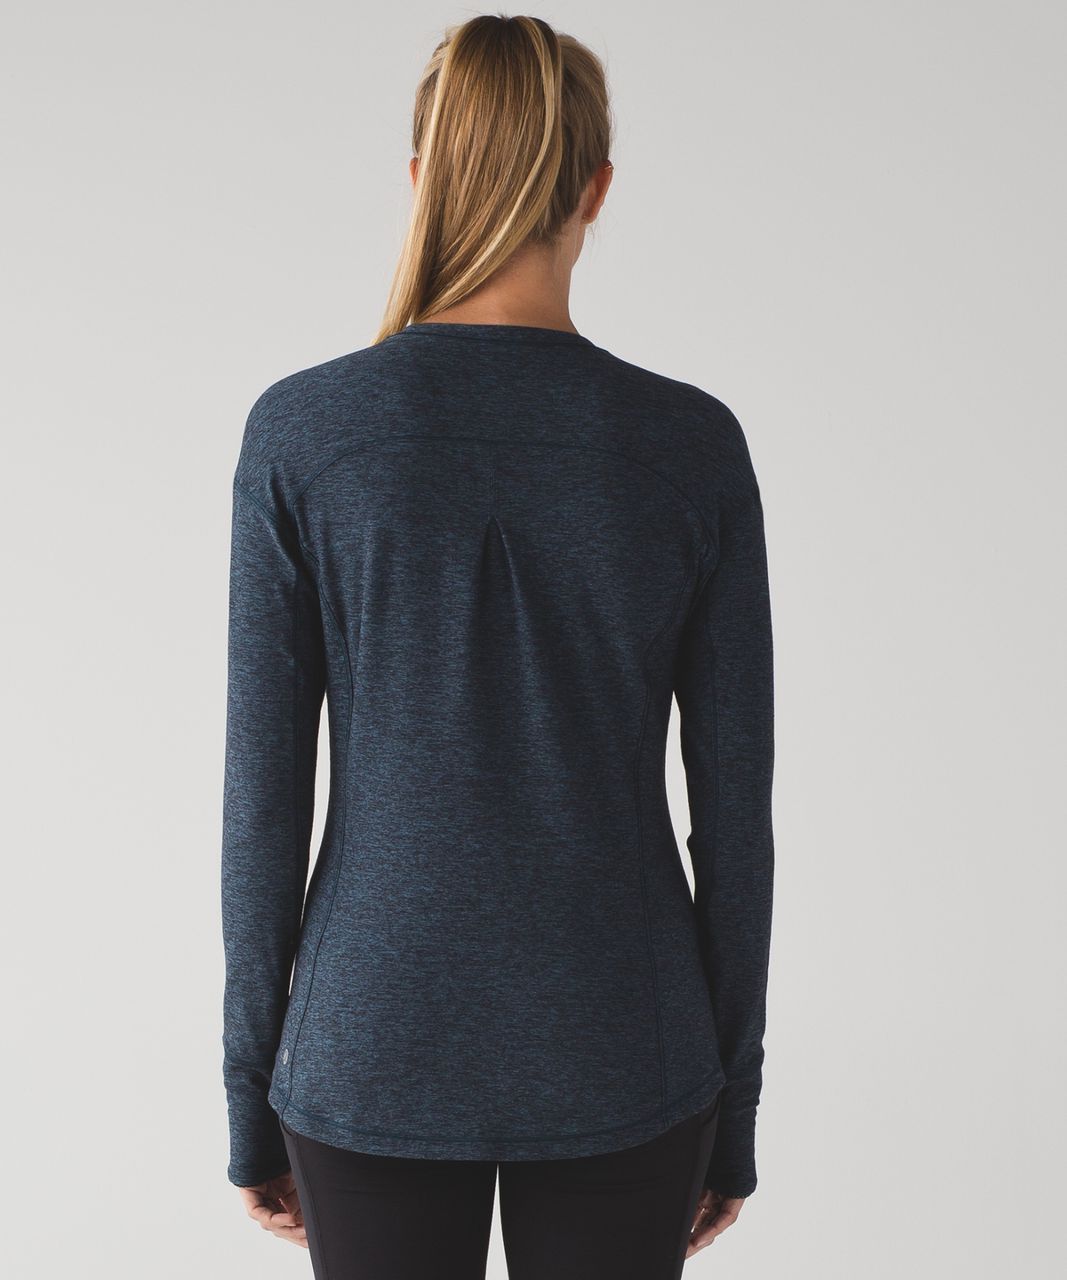 Lululemon Outrun Long Sleeve - Heathered Nocturnal Teal / Black